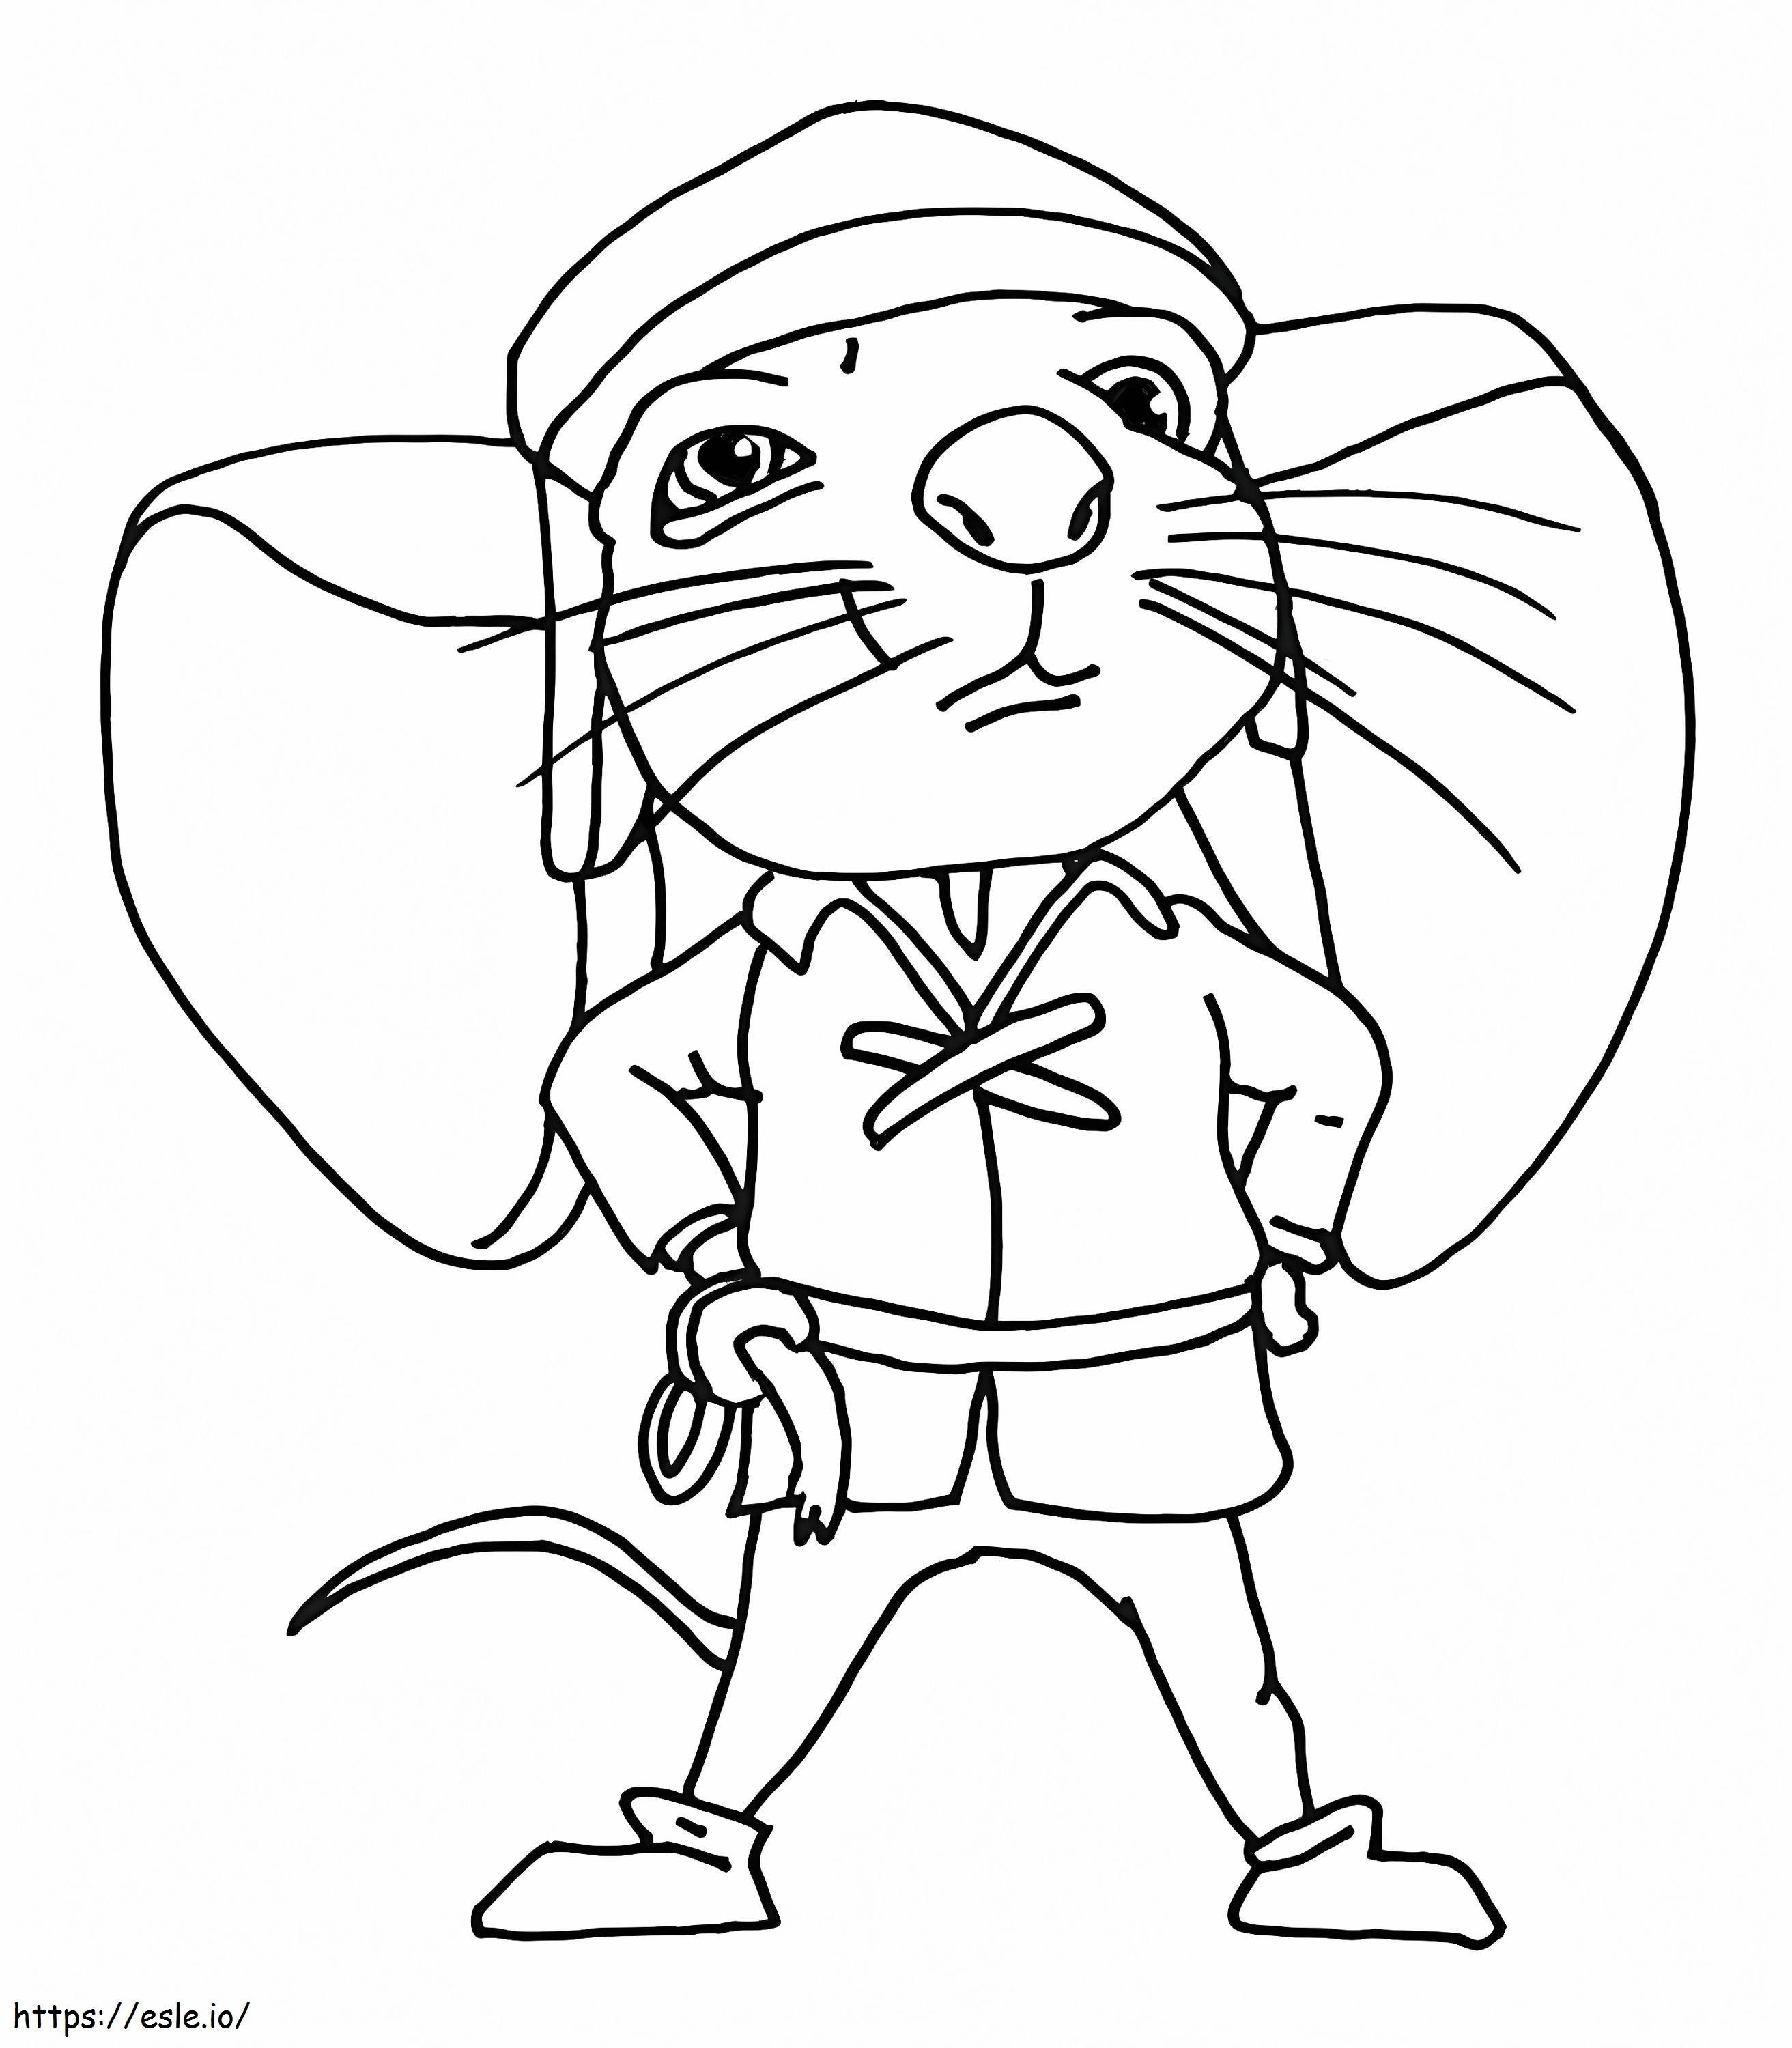 The Tale Of Despereaux 2 coloring page